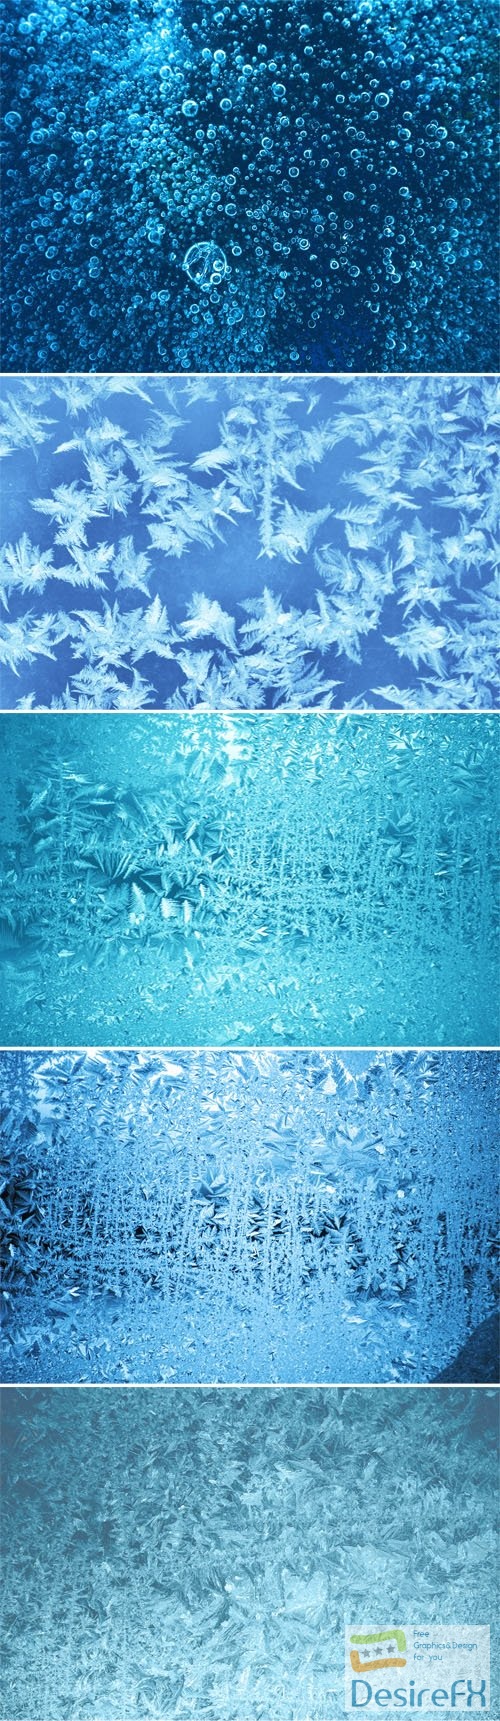 Ice Patterns for Photoshop + Textures